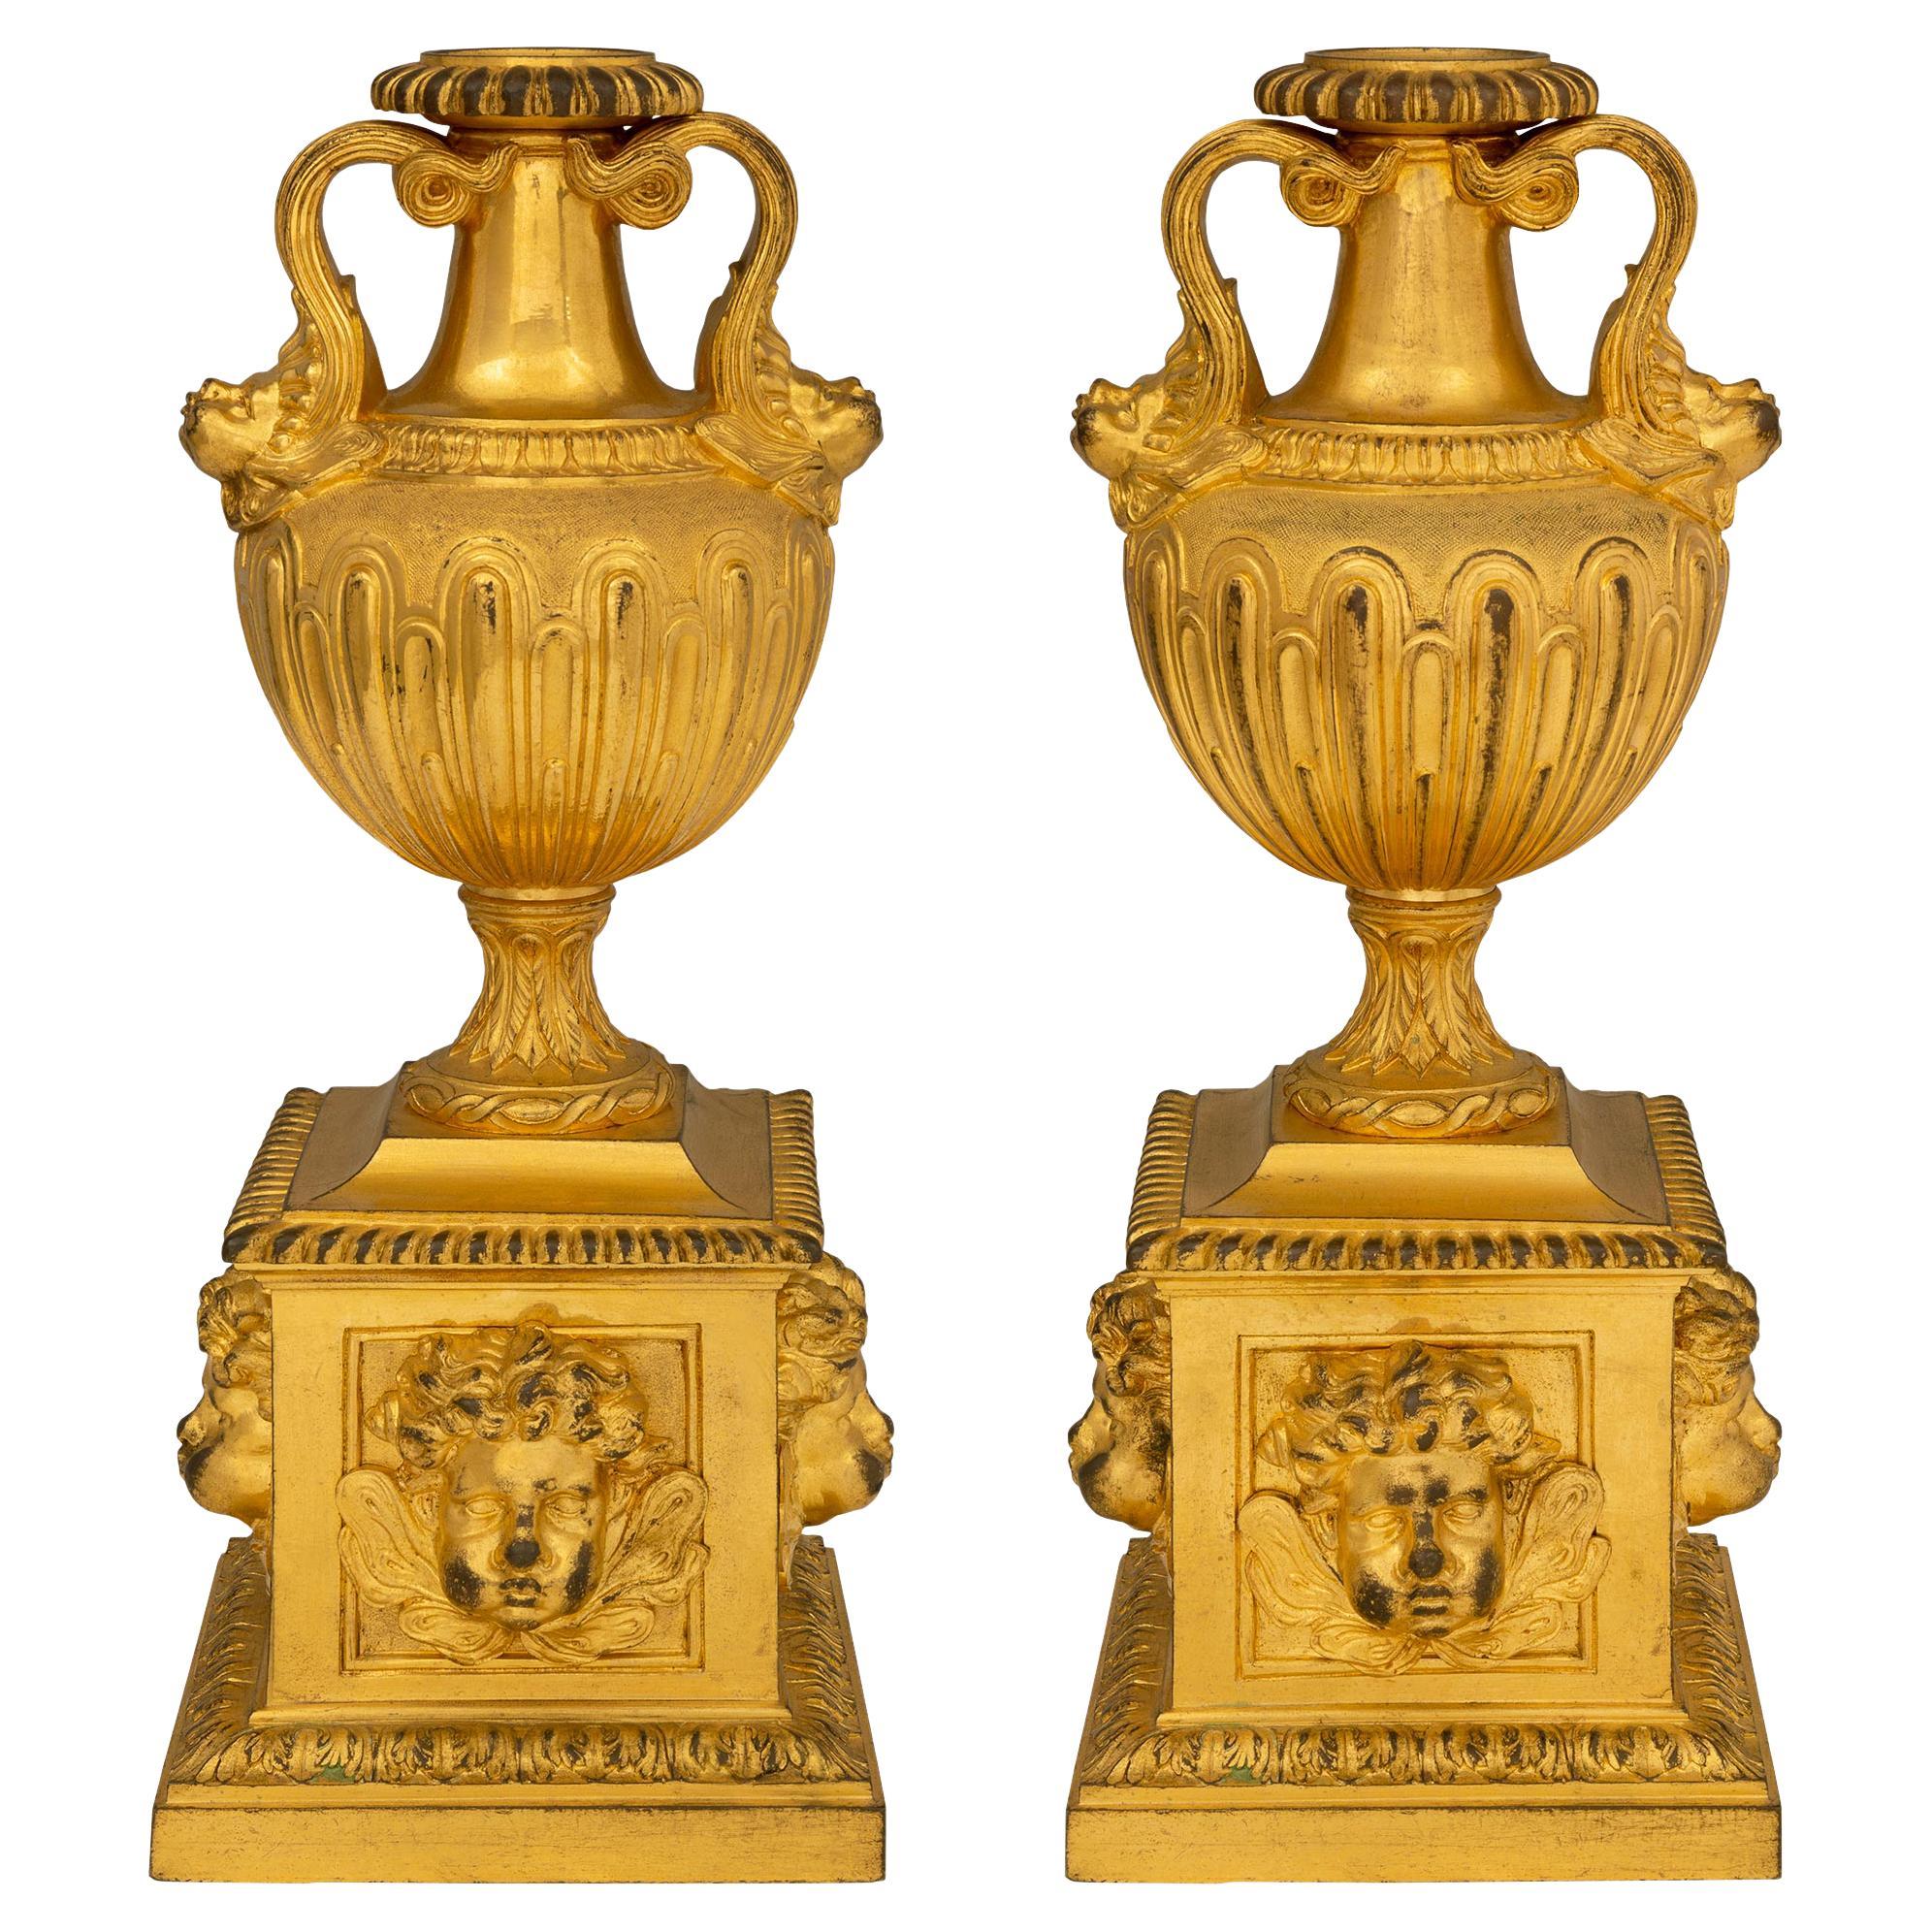 Pair of French 18th Century Louis XVI Period Ormolu Fireplace Chenets/Andirons